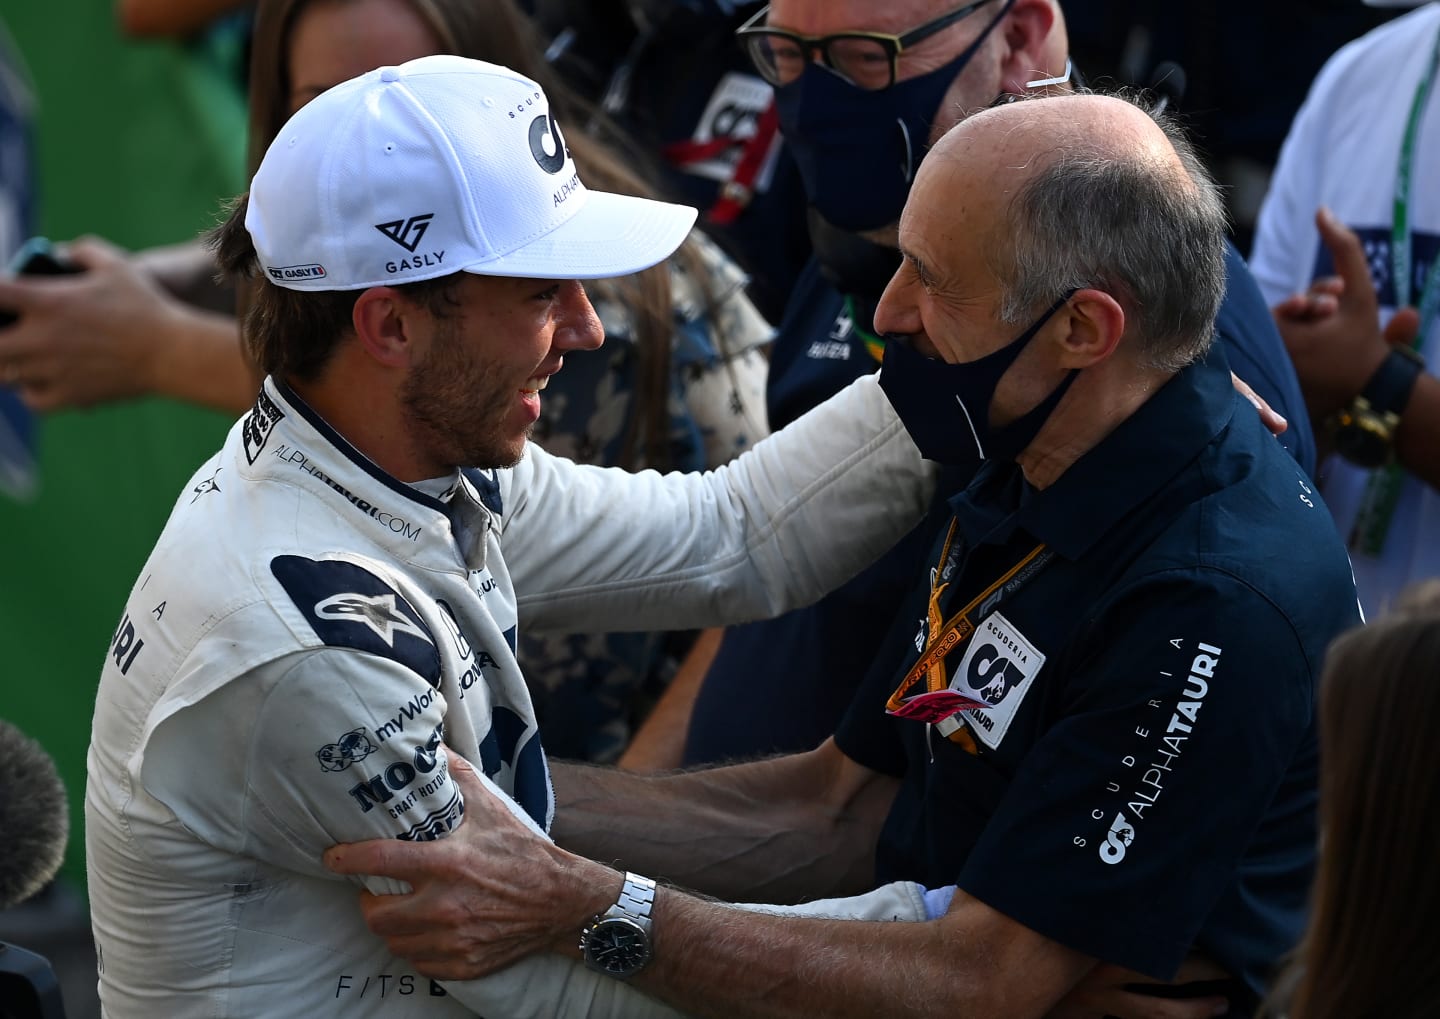 MONZA, ITALY - SEPTEMBER 06: Race winner Pierre Gasly of France and Scuderia AlphaTauri celebrates with Scuderia AlphaTauri Team Principal Franz Tost in parc ferme during the F1 Grand Prix of Italy at Autodromo di Monza on September 06, 2020 in Monza, Italy. (Photo by Clive Mason - Formula 1/Formula 1 via Getty Images)